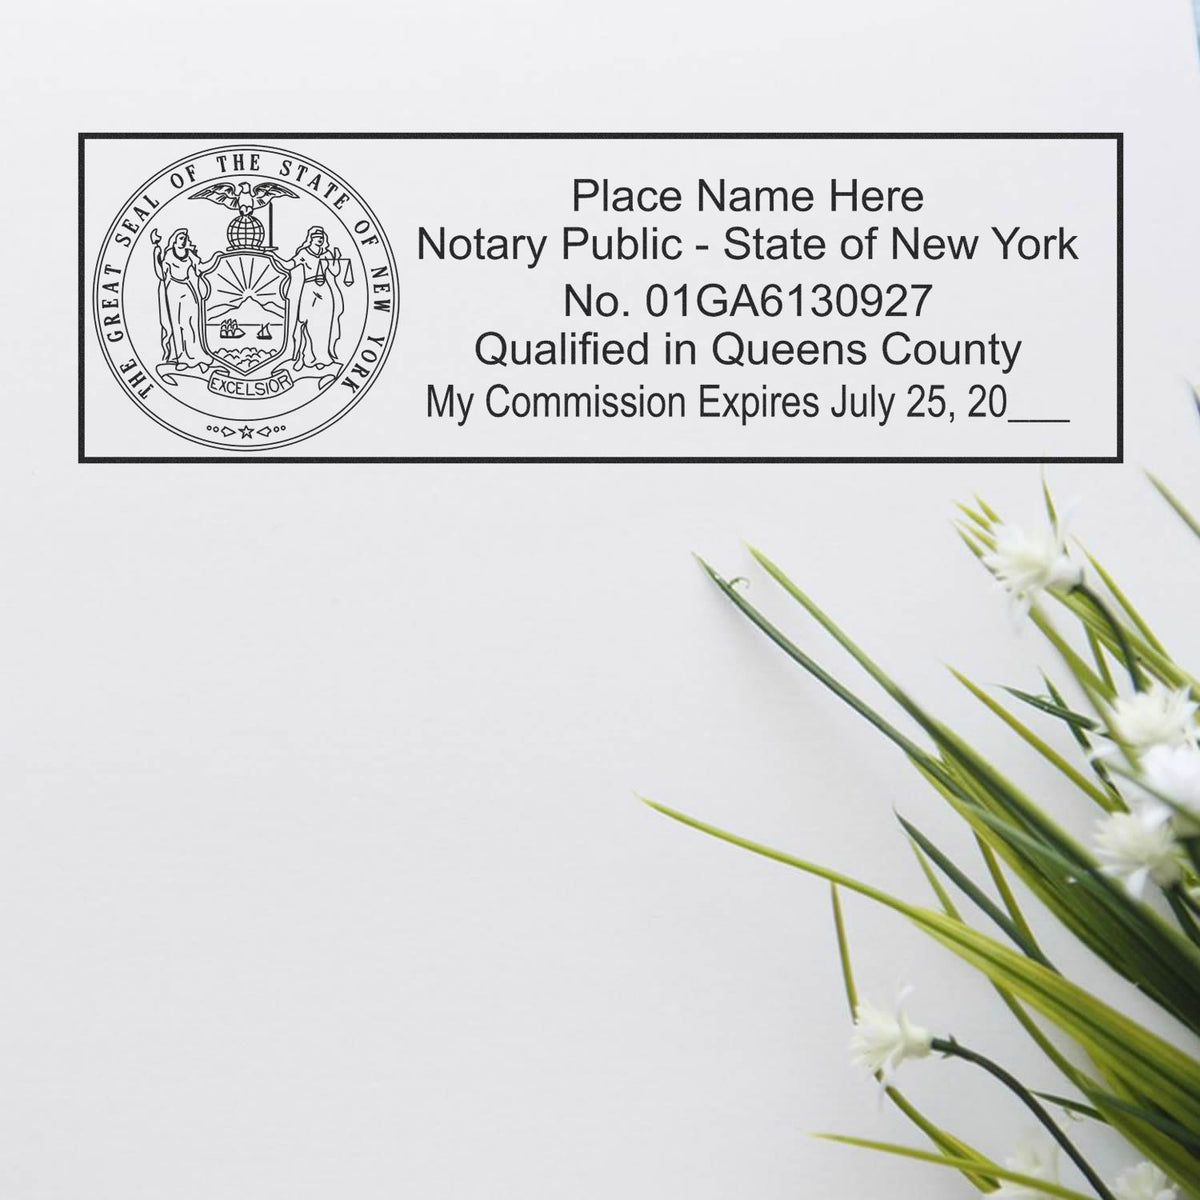 This paper is stamped with a sample imprint of the Super Slim New York Notary Public Stamp, signifying its quality and reliability.